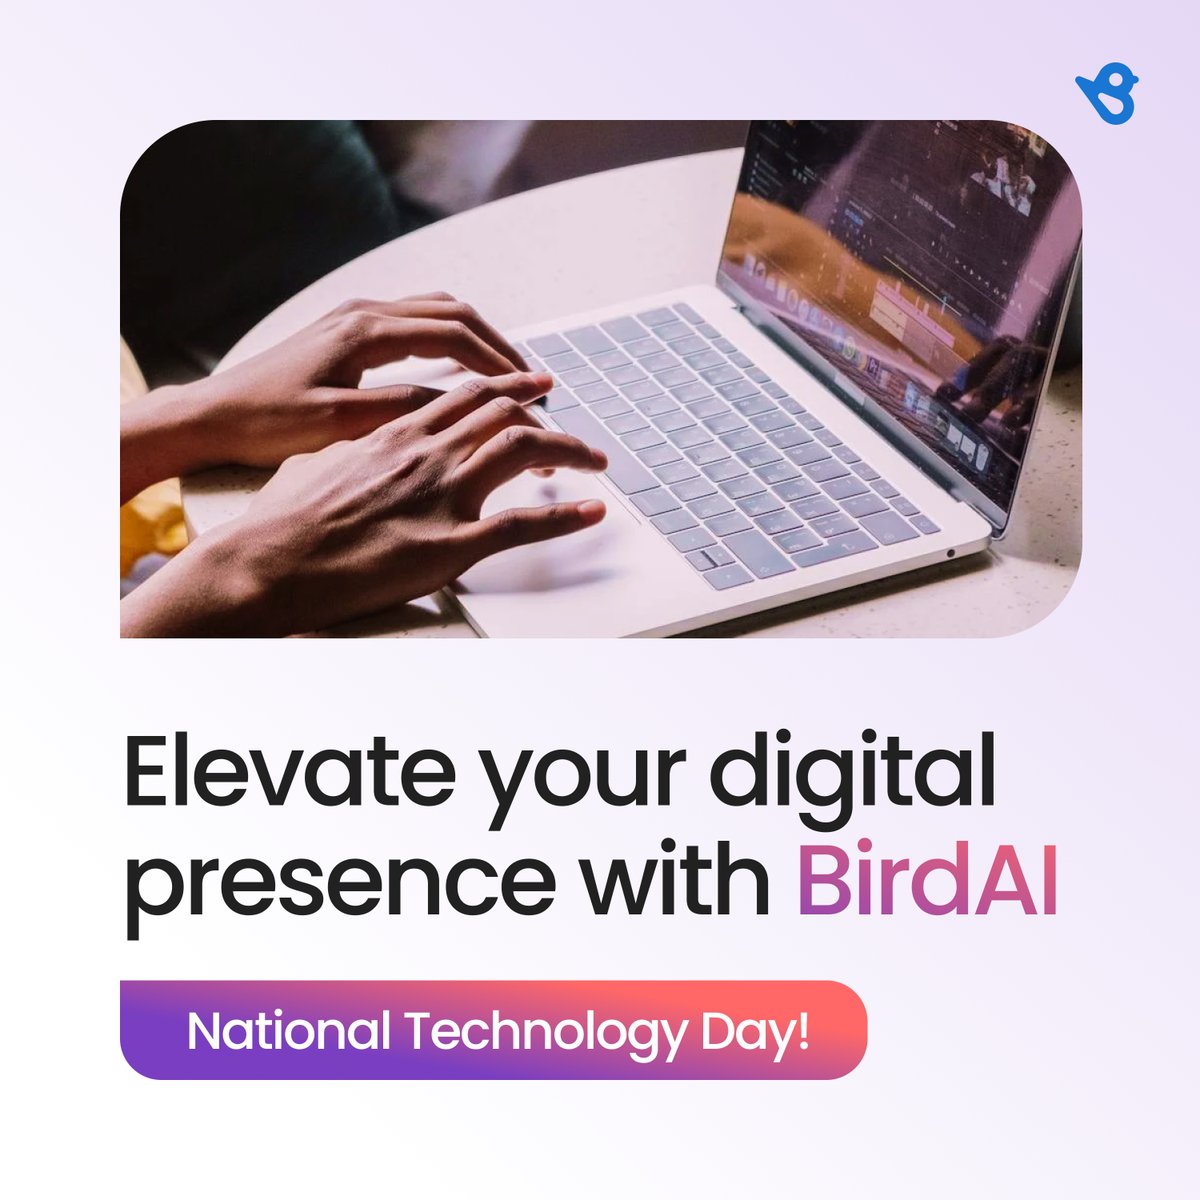 Today, on National Technology Day, we're proud to be at forefront of innovation at Birdeye. Enhance your online presence and revolutionize customer engagement. Learn more in our latest blog: bit.ly/3W9MLRb